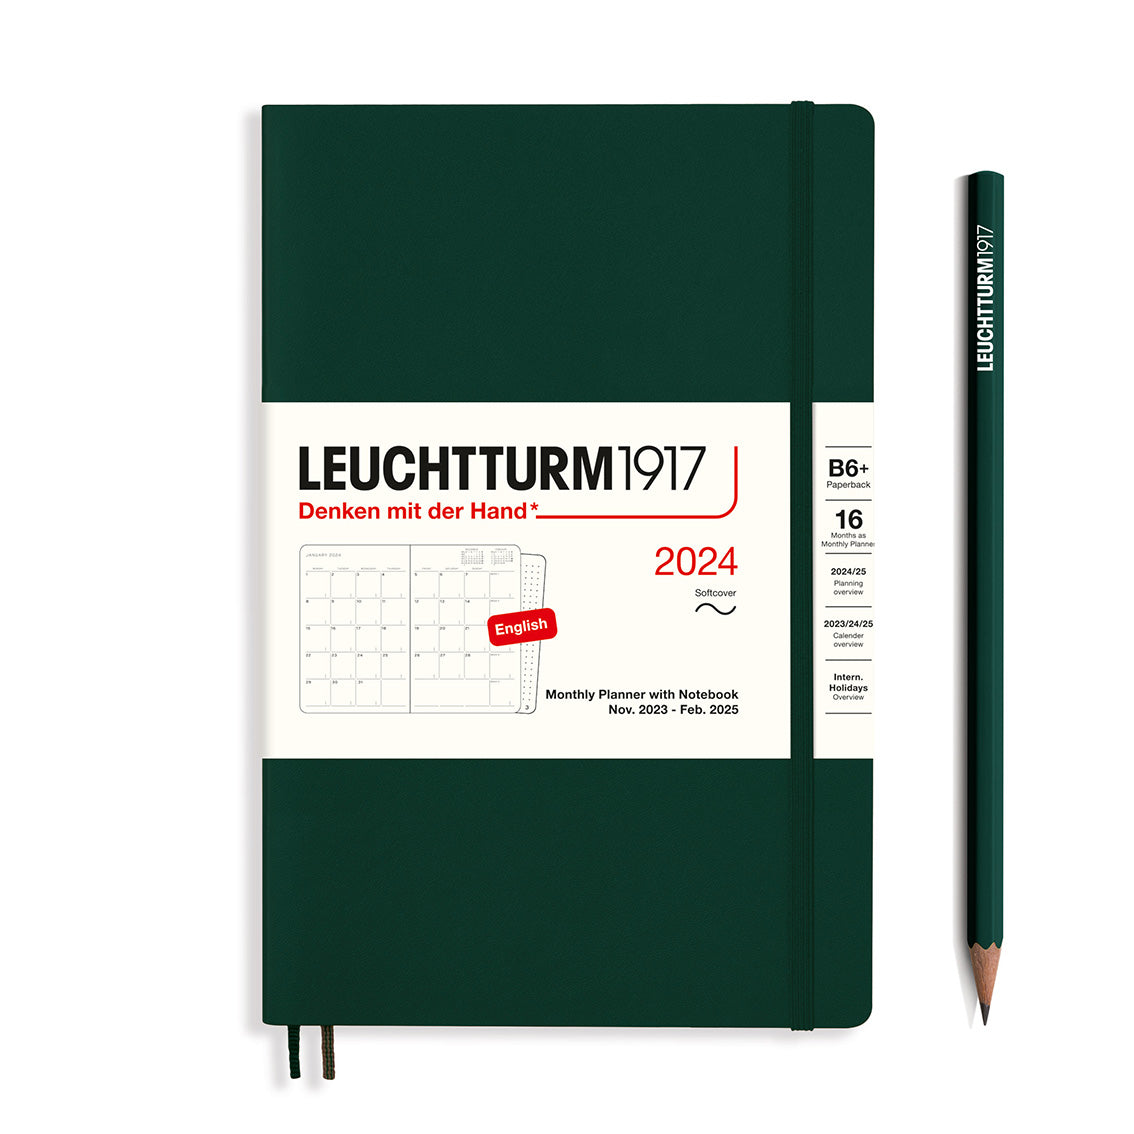 Leuchtturm Monthly Planner with Notebook - Paperback (B6+) 5' x 7